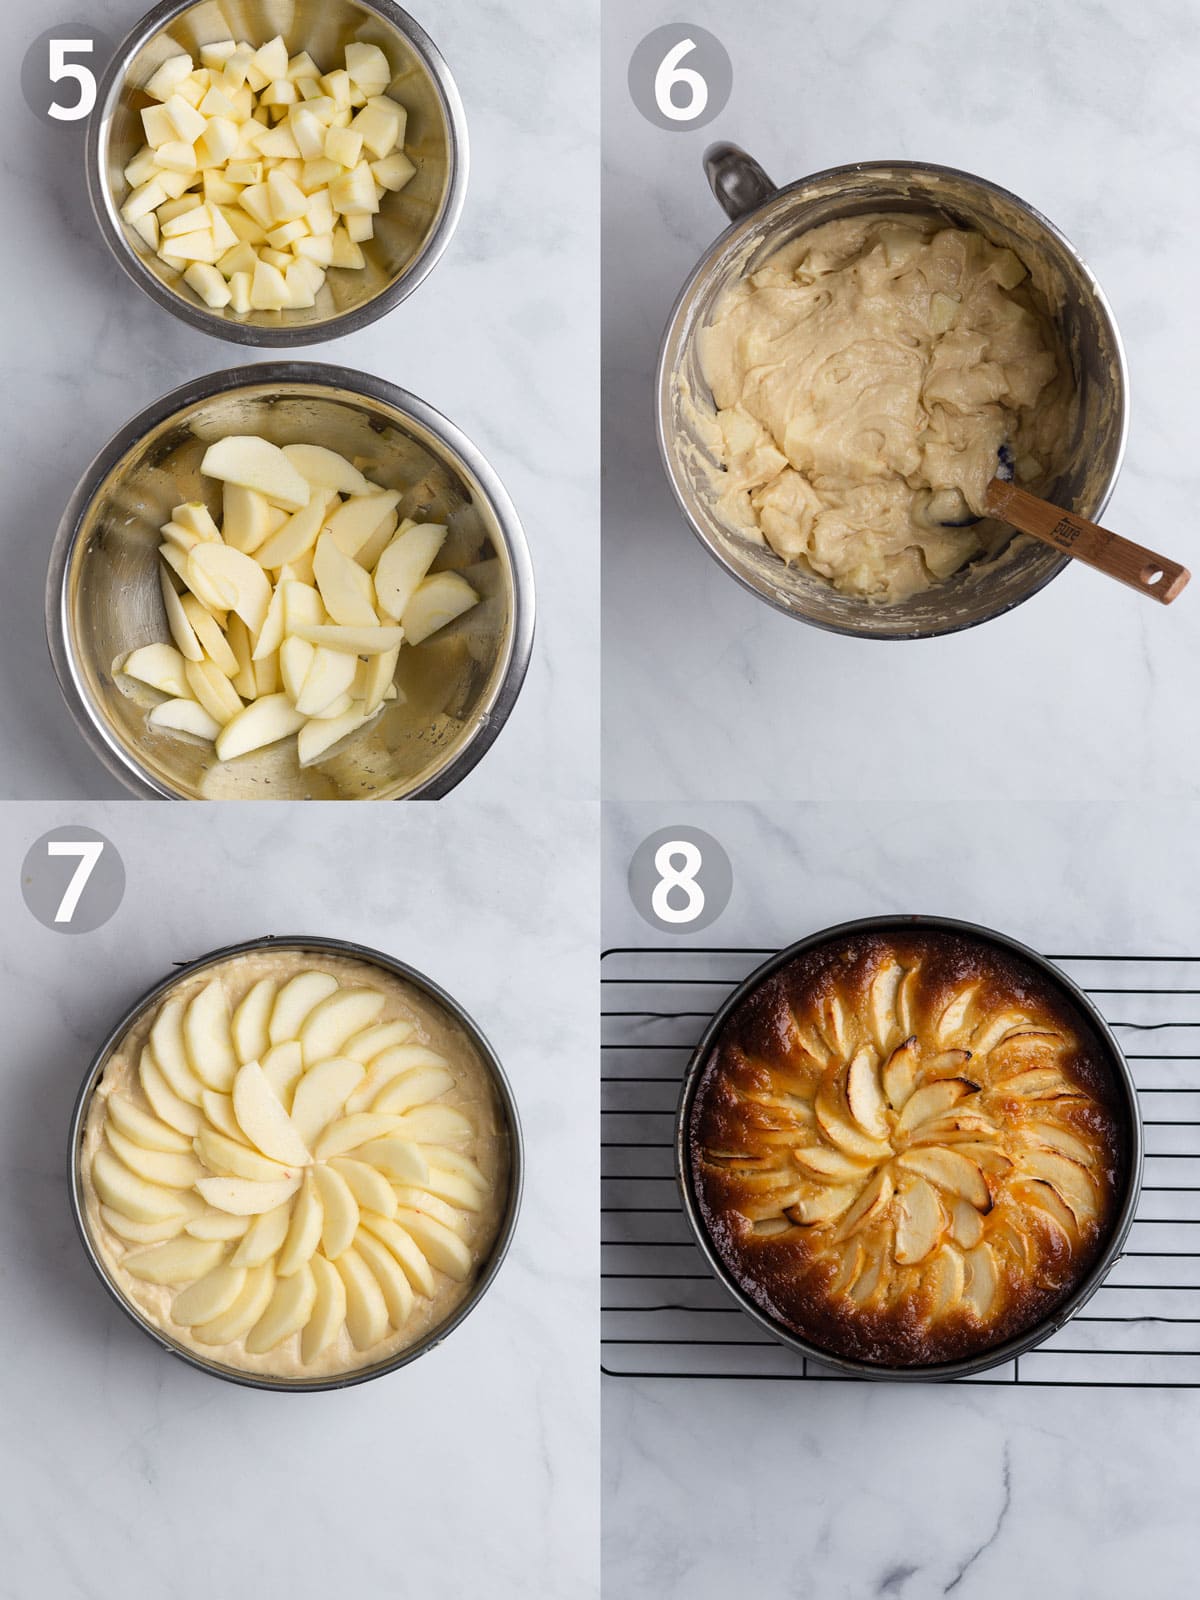 Cake steps 5-8, including cutting apples for inside and top of cake and baking cake.